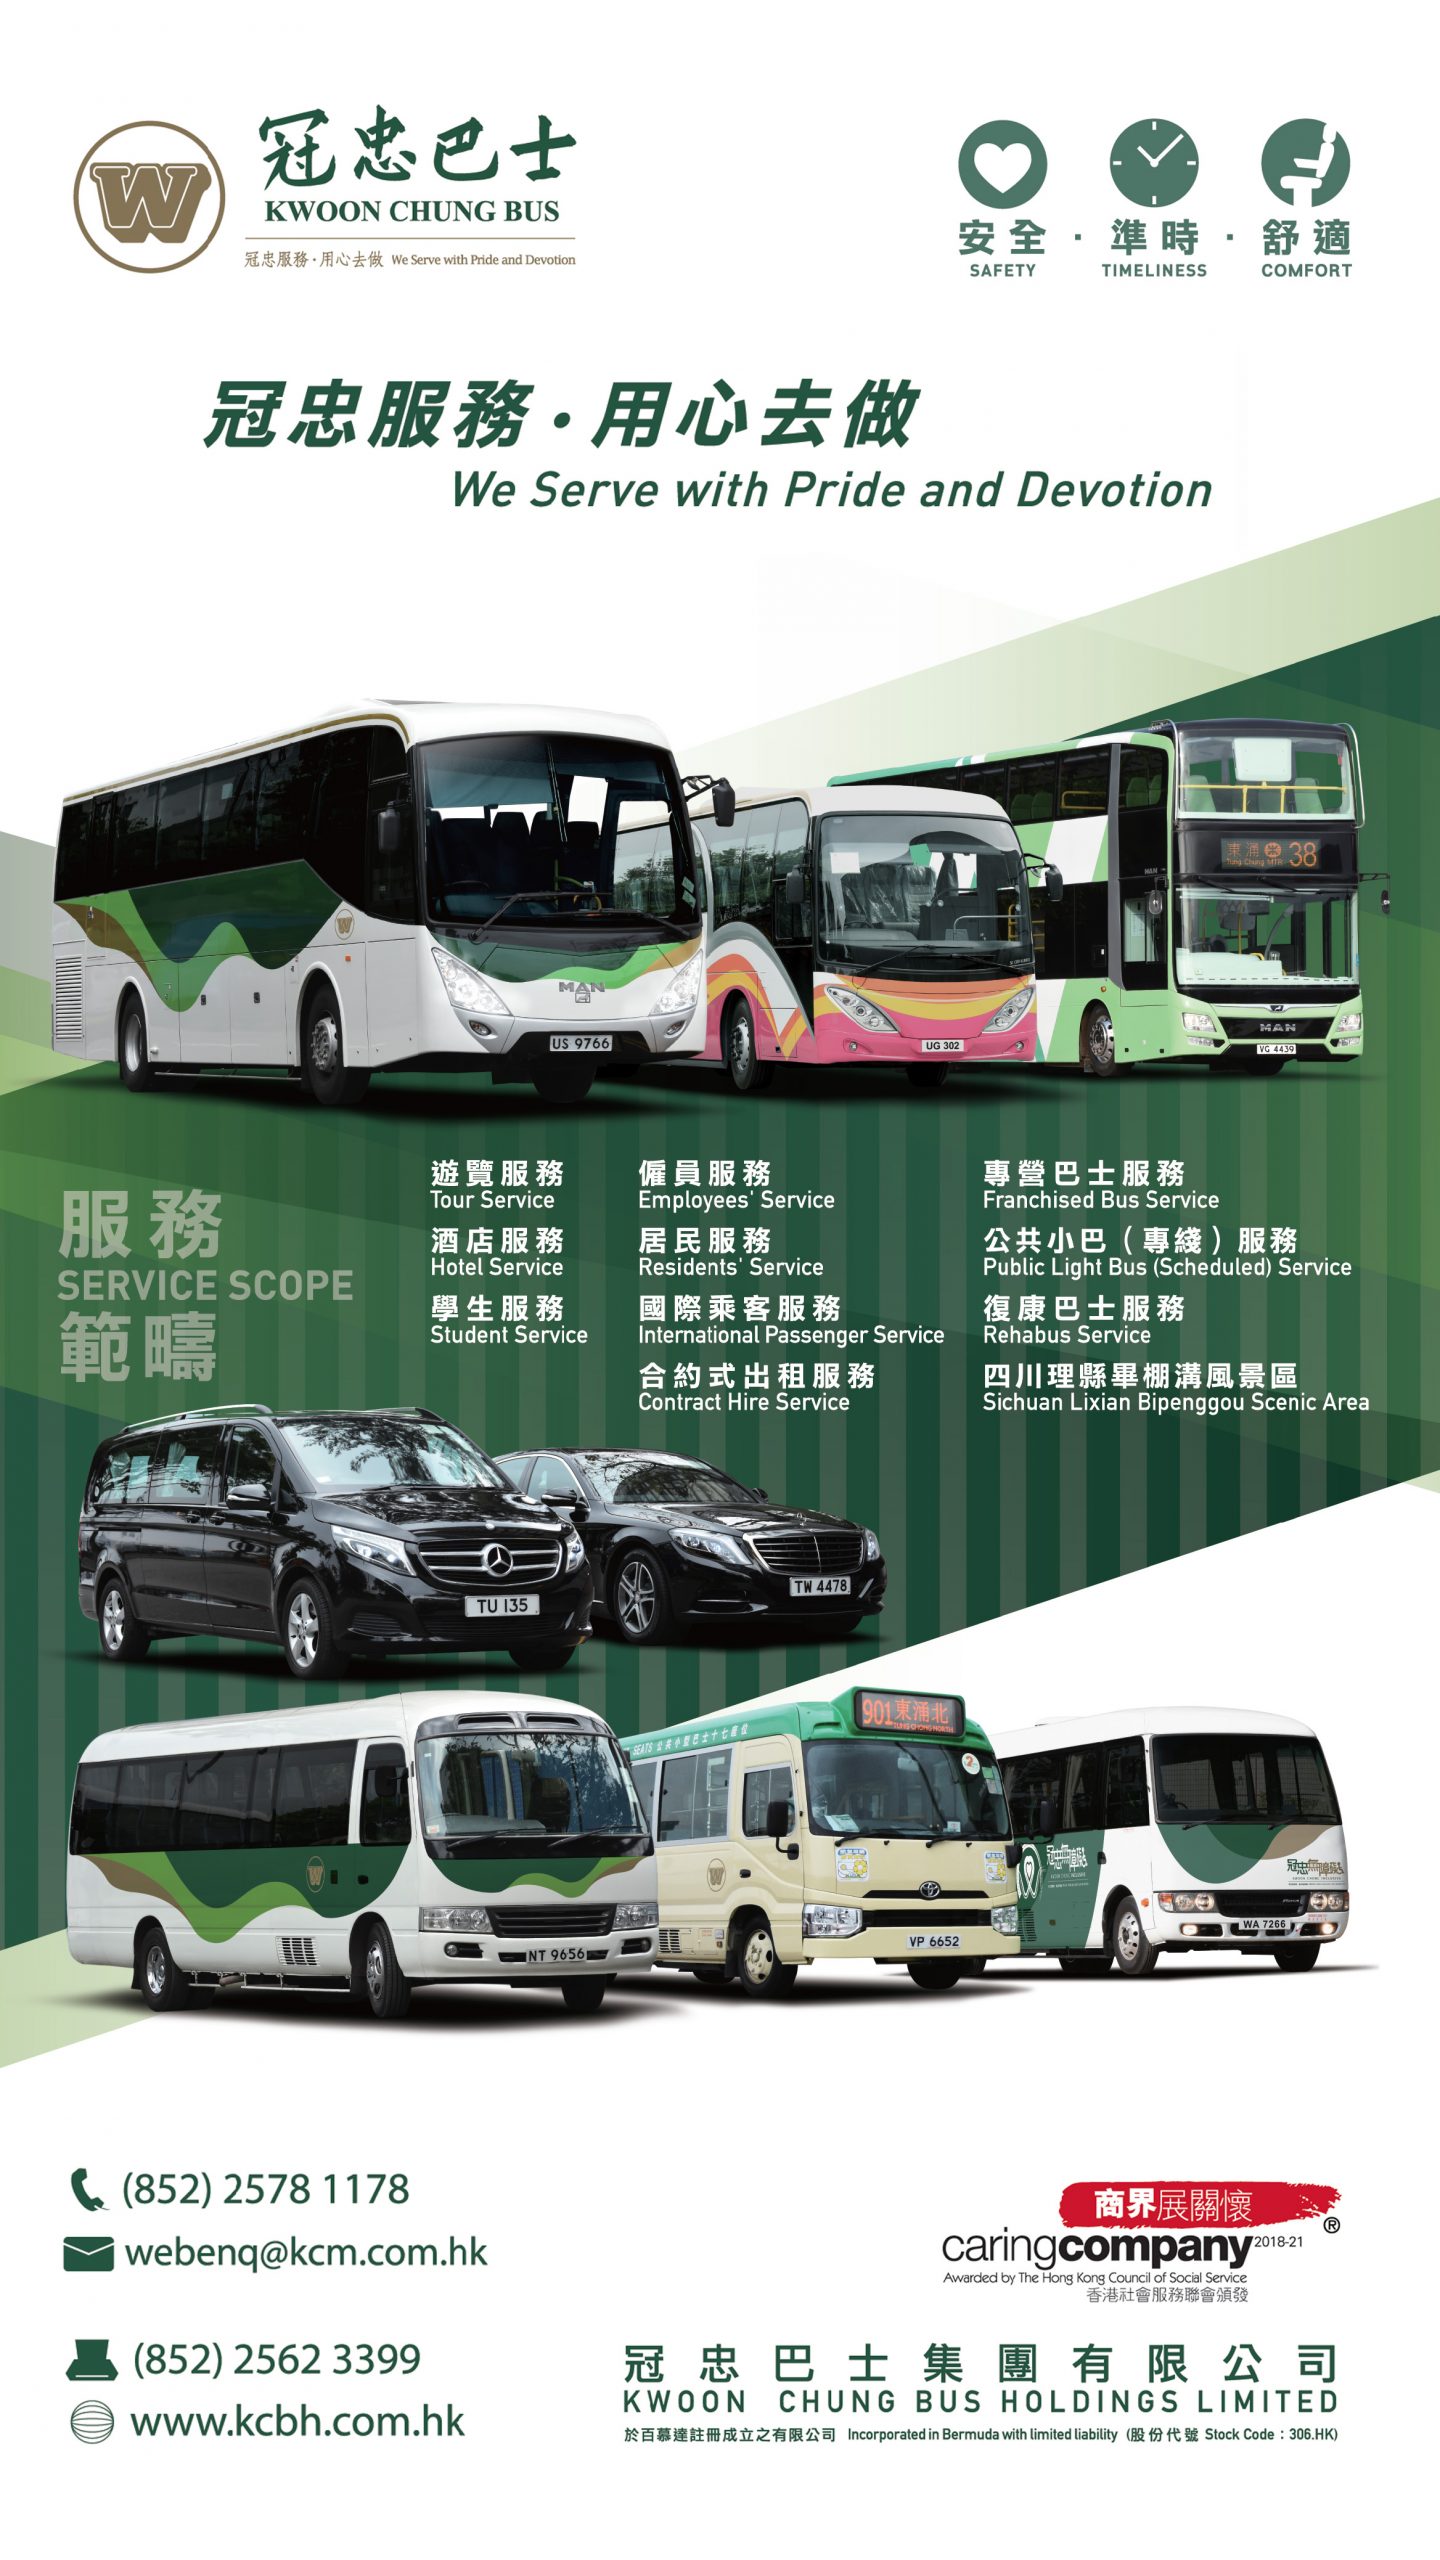 Kwoon Chung Bus